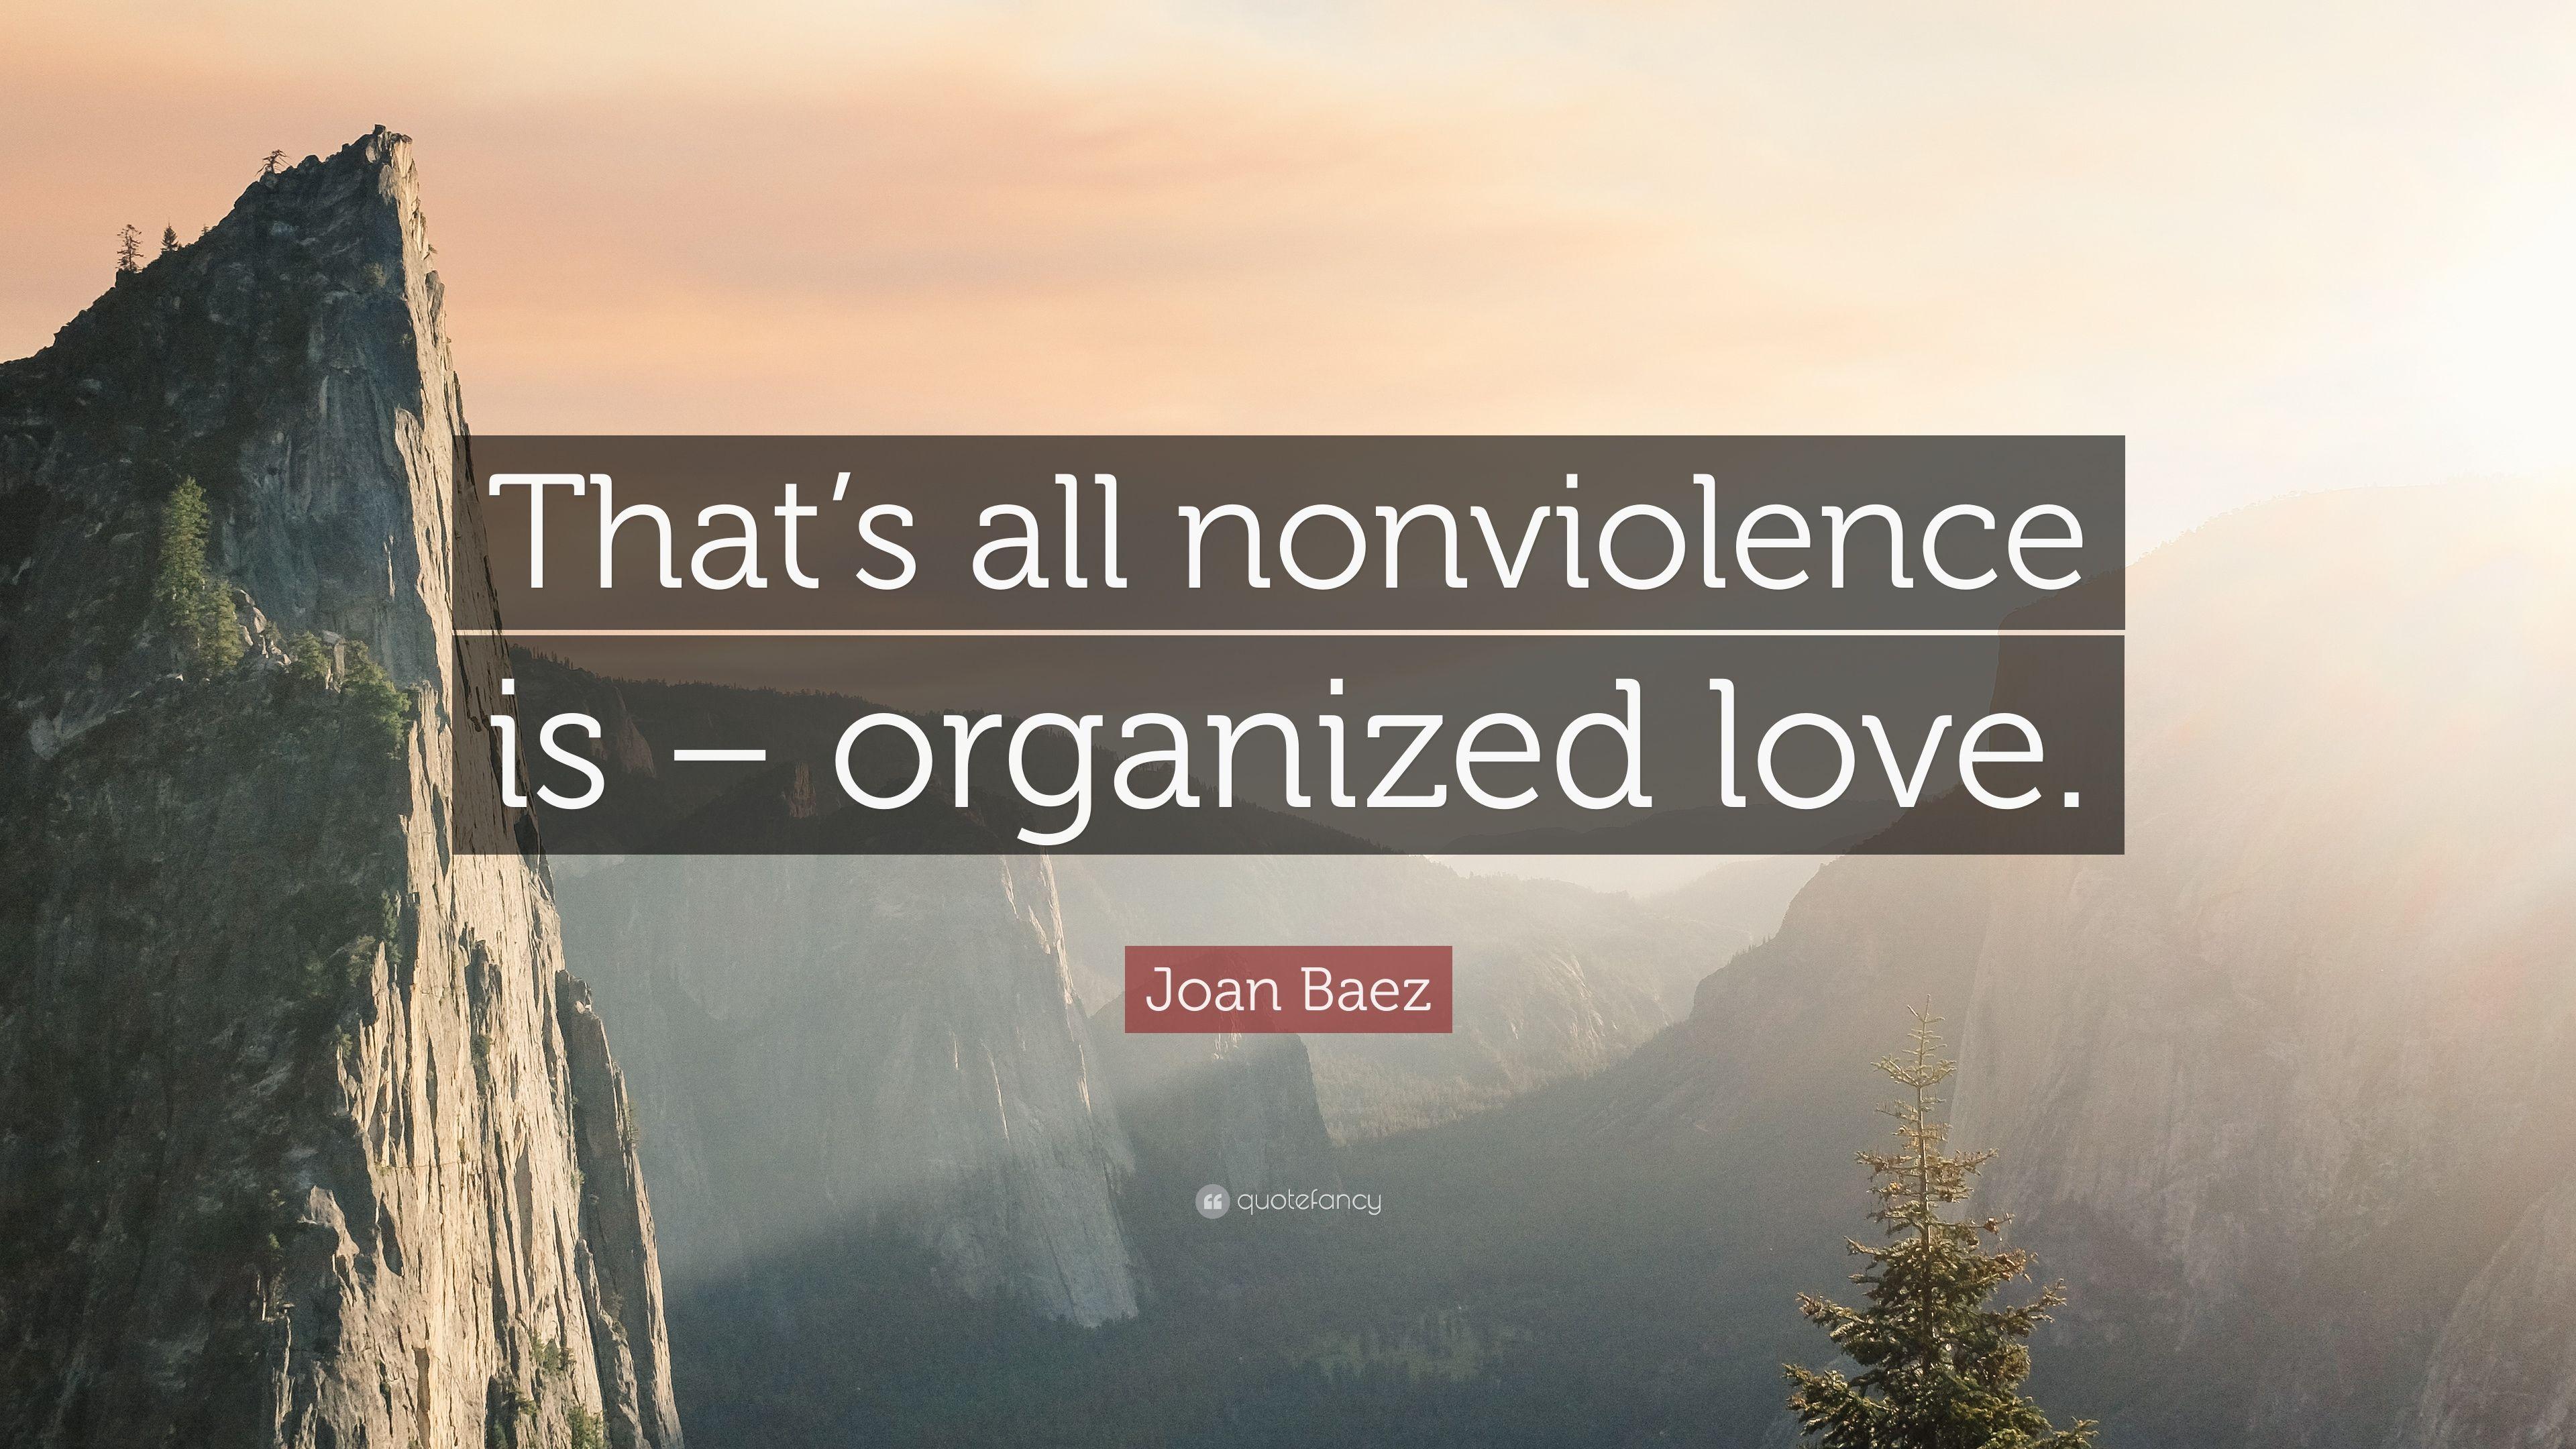 Joan Baez Quote: “That's all nonviolence is – organized love.”